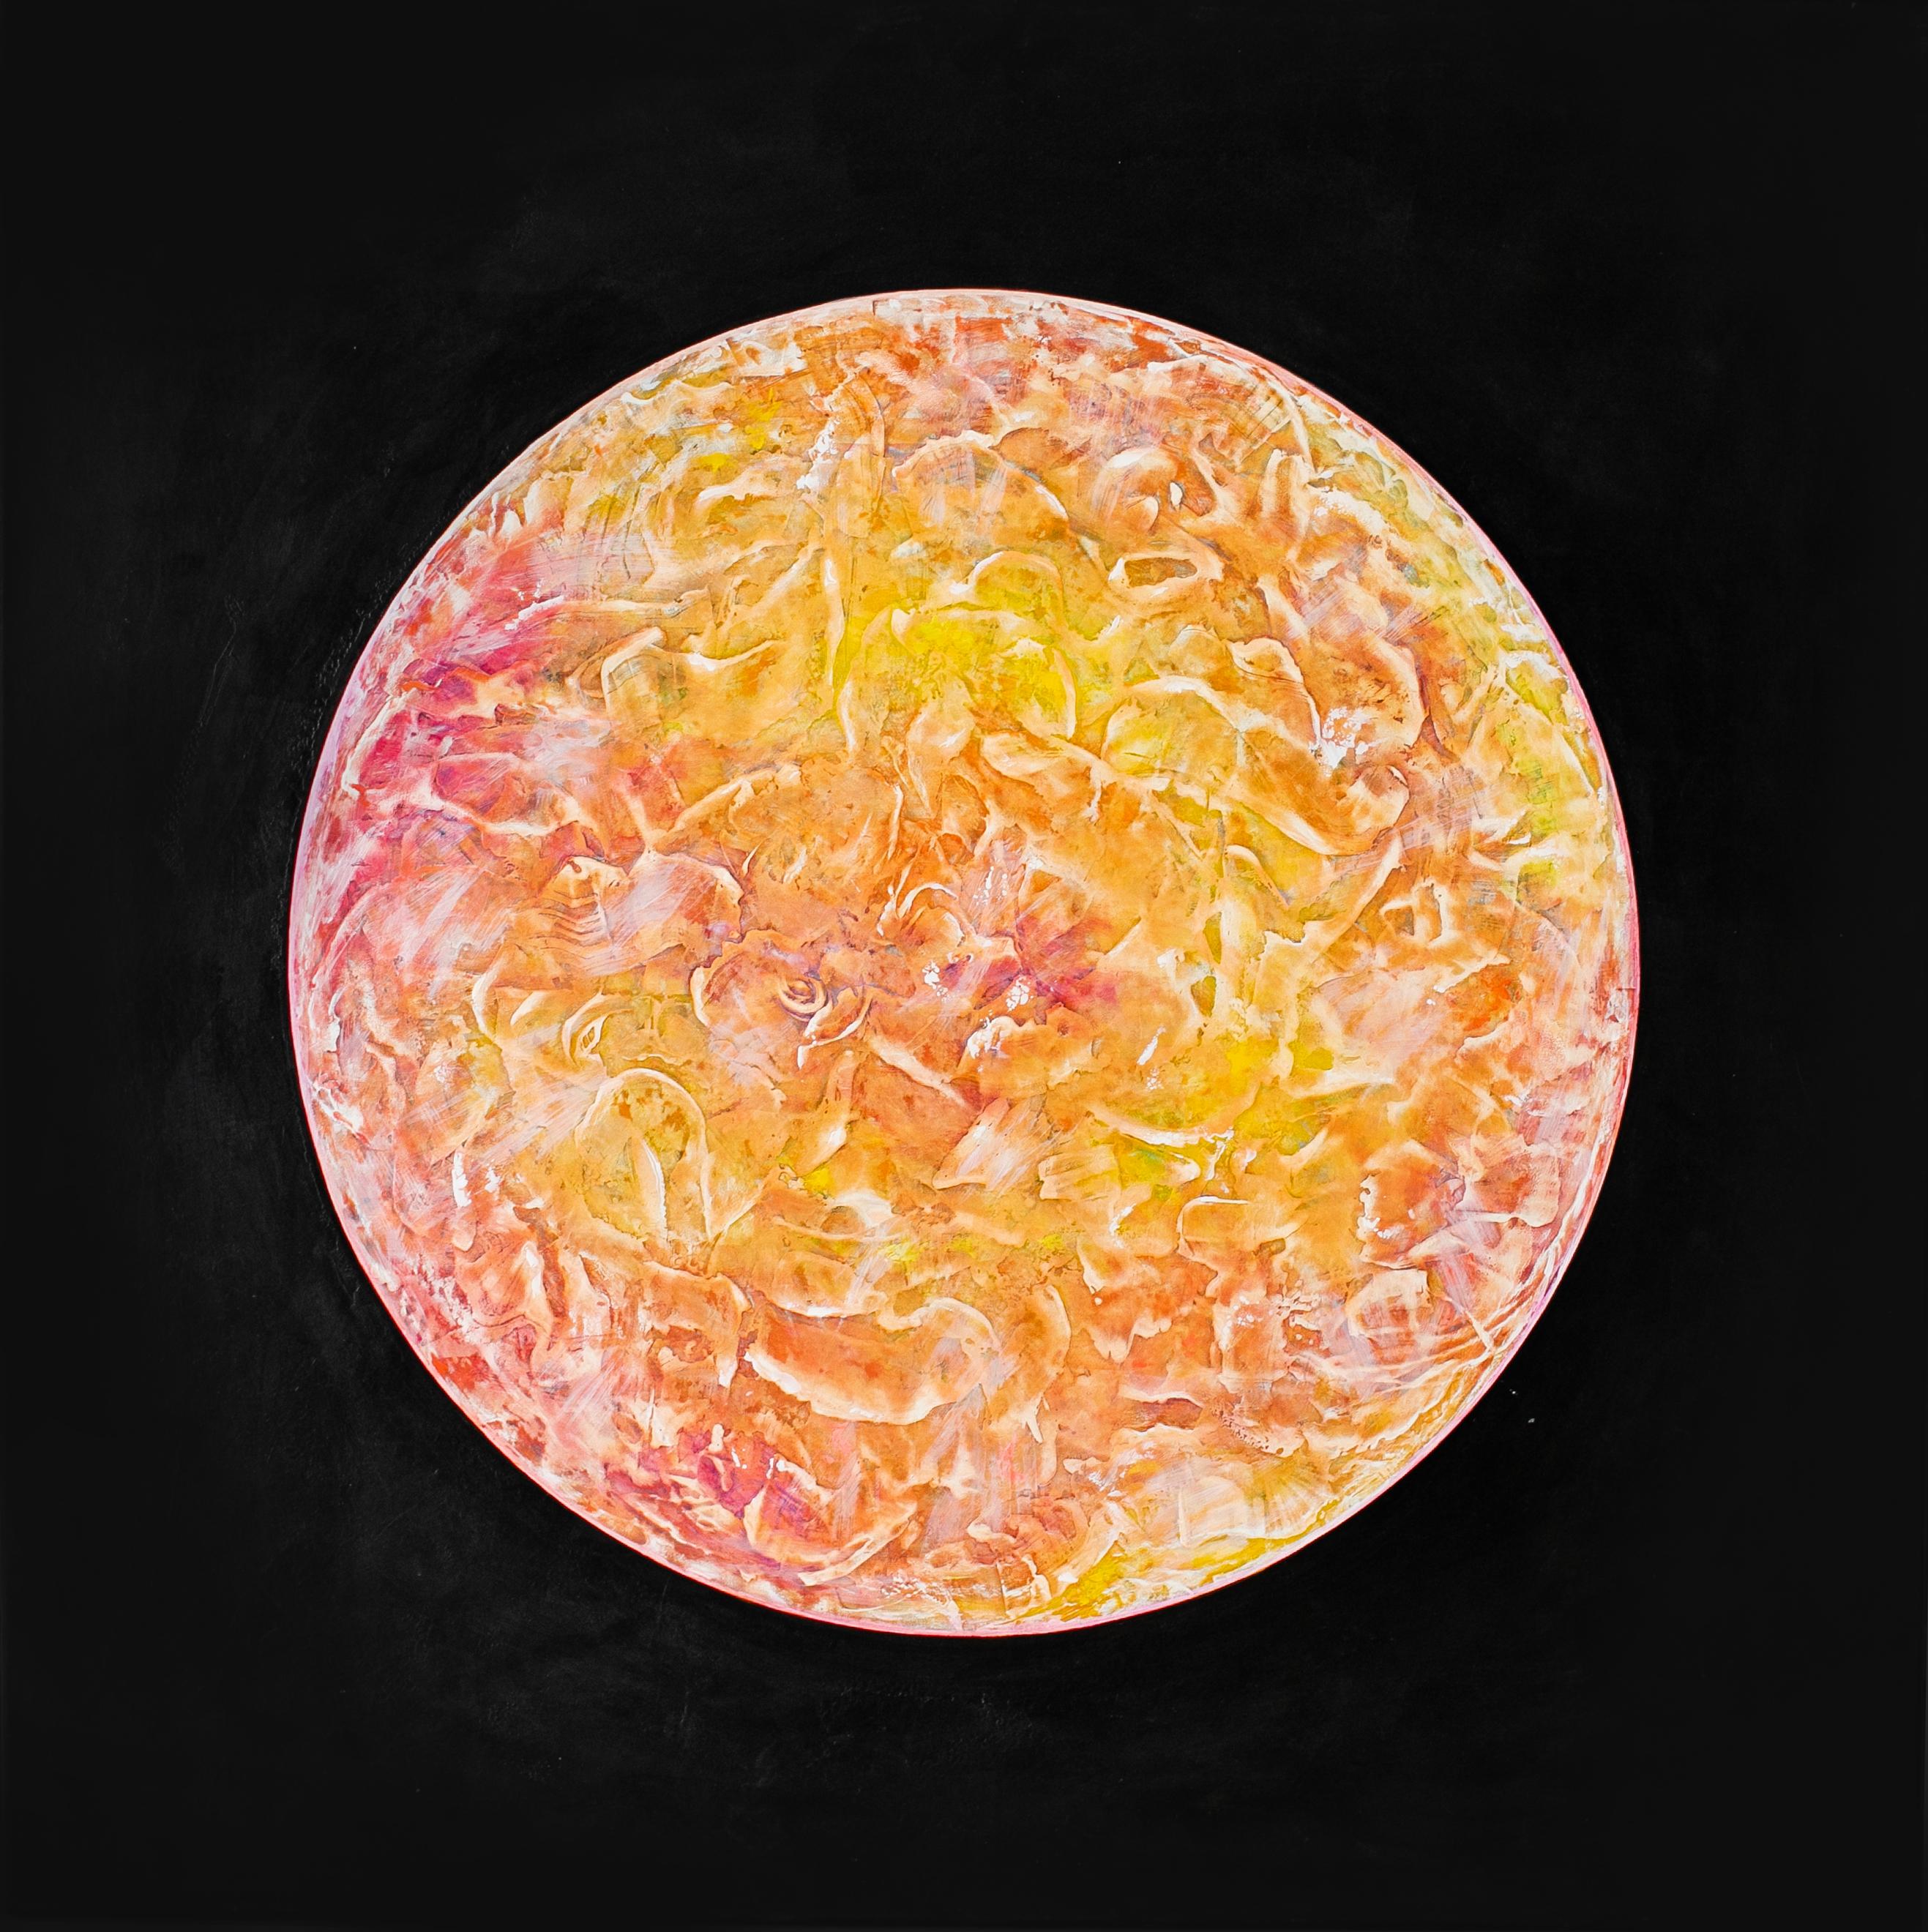 Gogi Gelantia Abstract Painting - Venus - Abstract, 21st Century, Planet, Yellow, Orange, Space, Square, Pattern